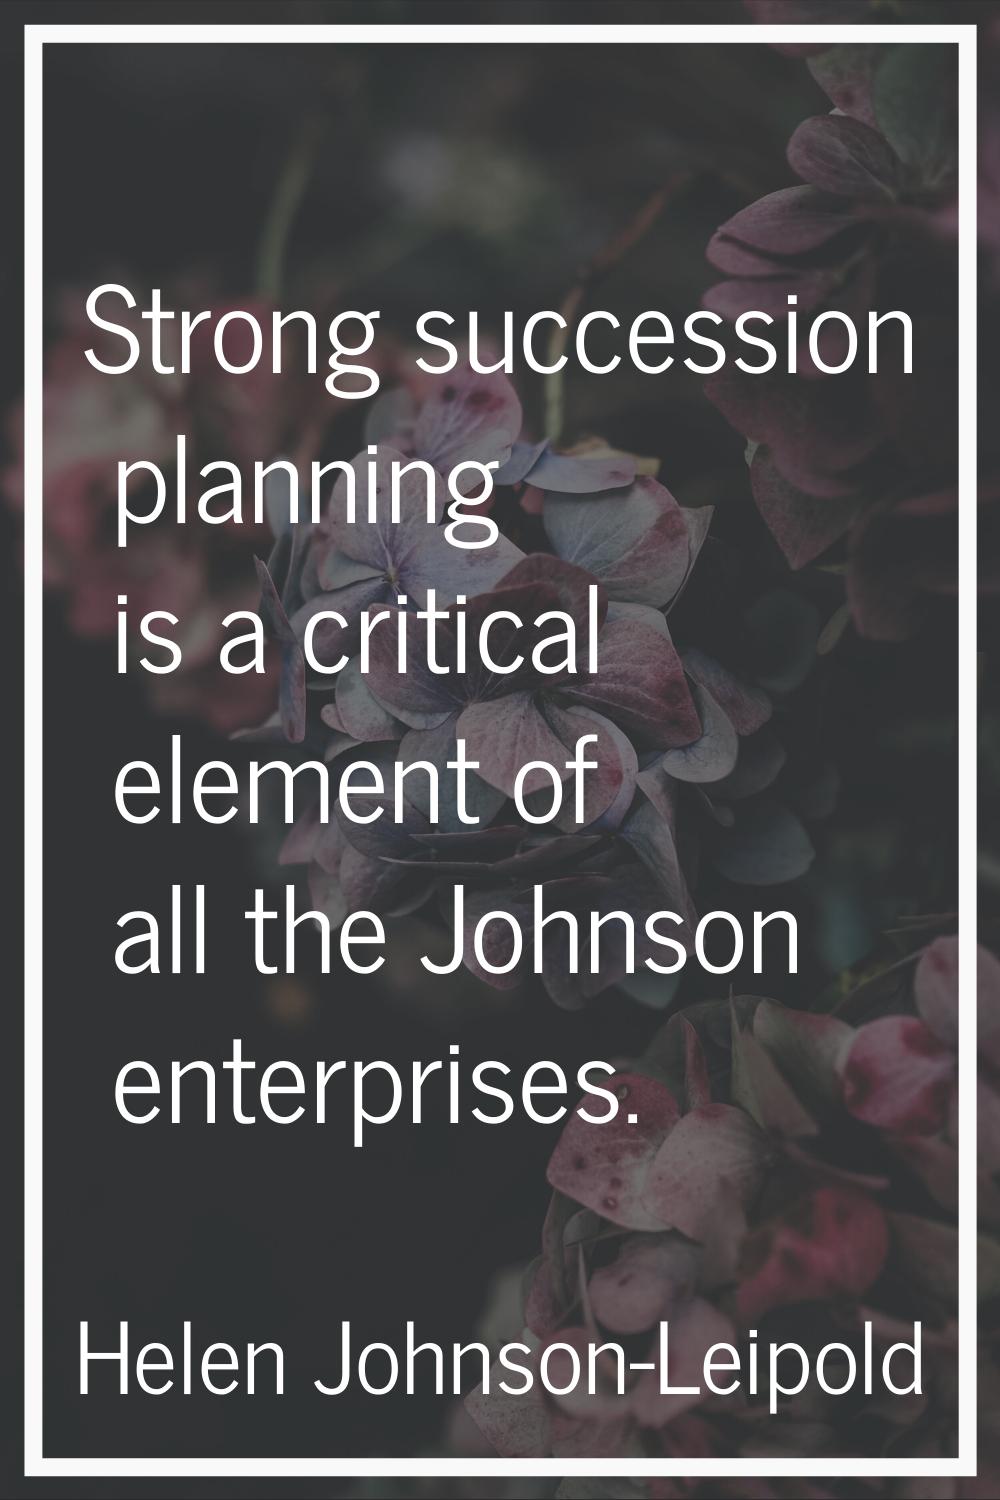 Strong succession planning is a critical element of all the Johnson enterprises.